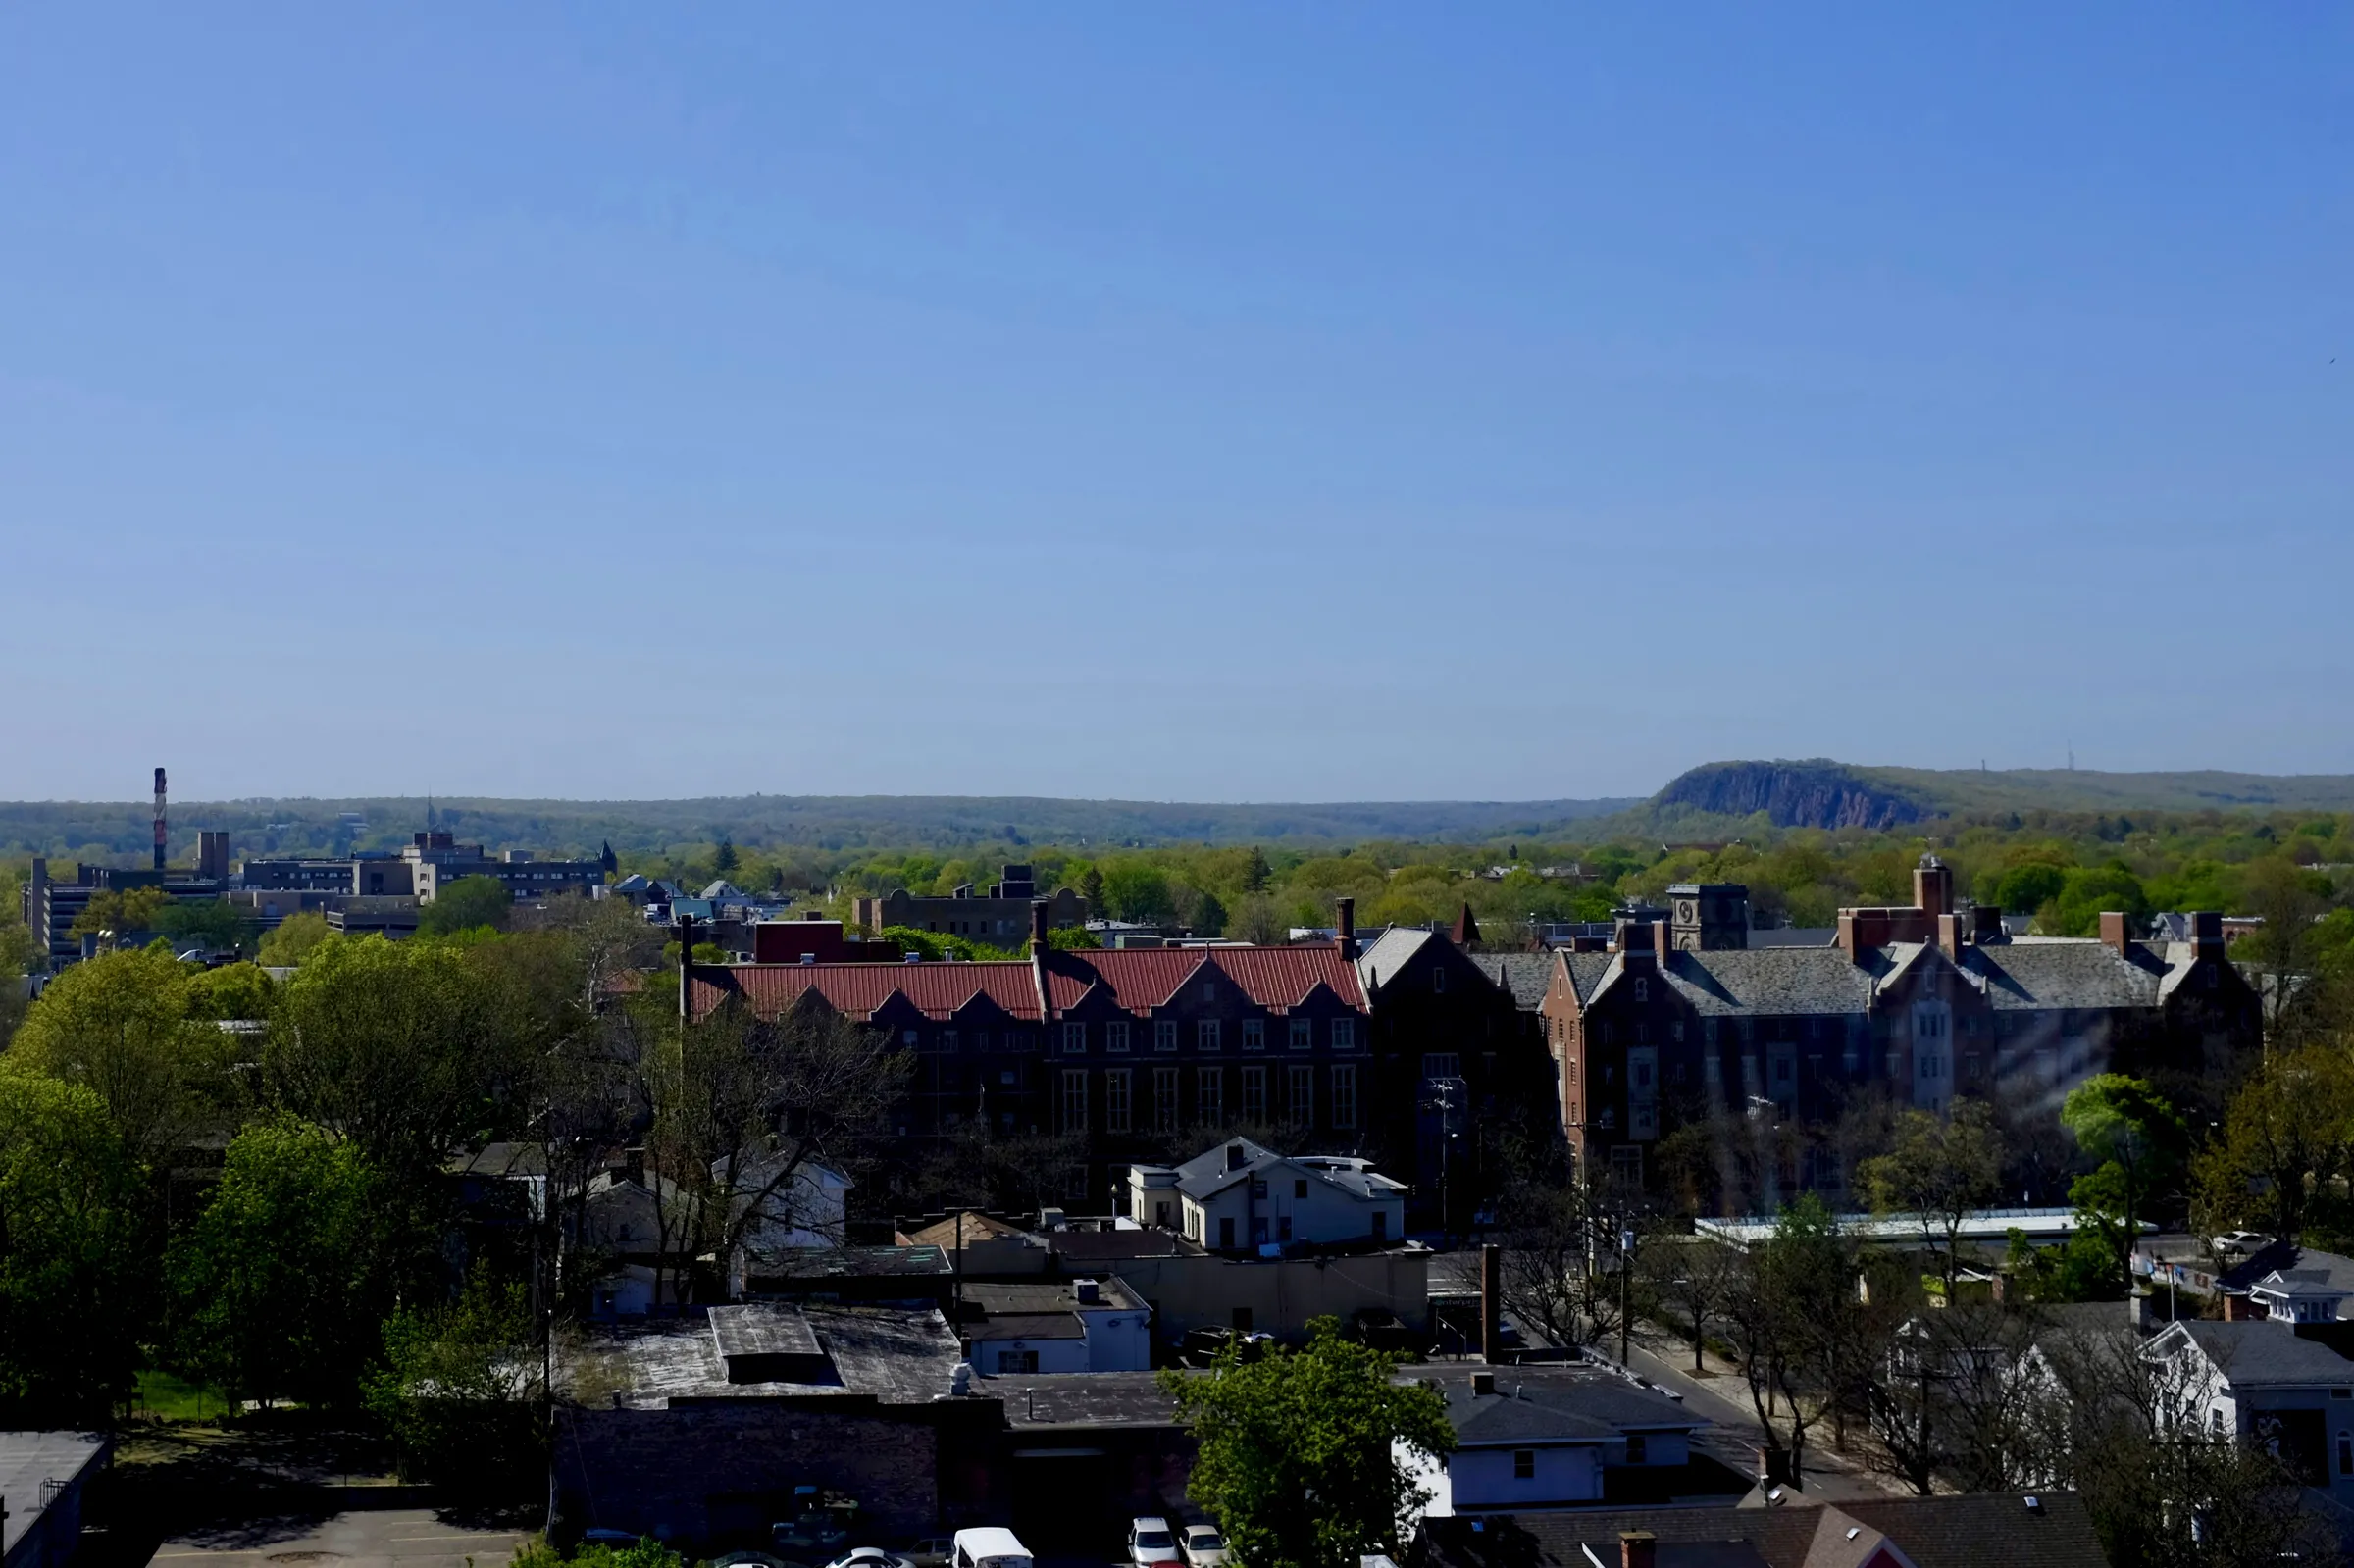 A northwest view from an apartment tower in New Haven, Connecticut. In the distance, beyond the city, the edge of a large, green hill.